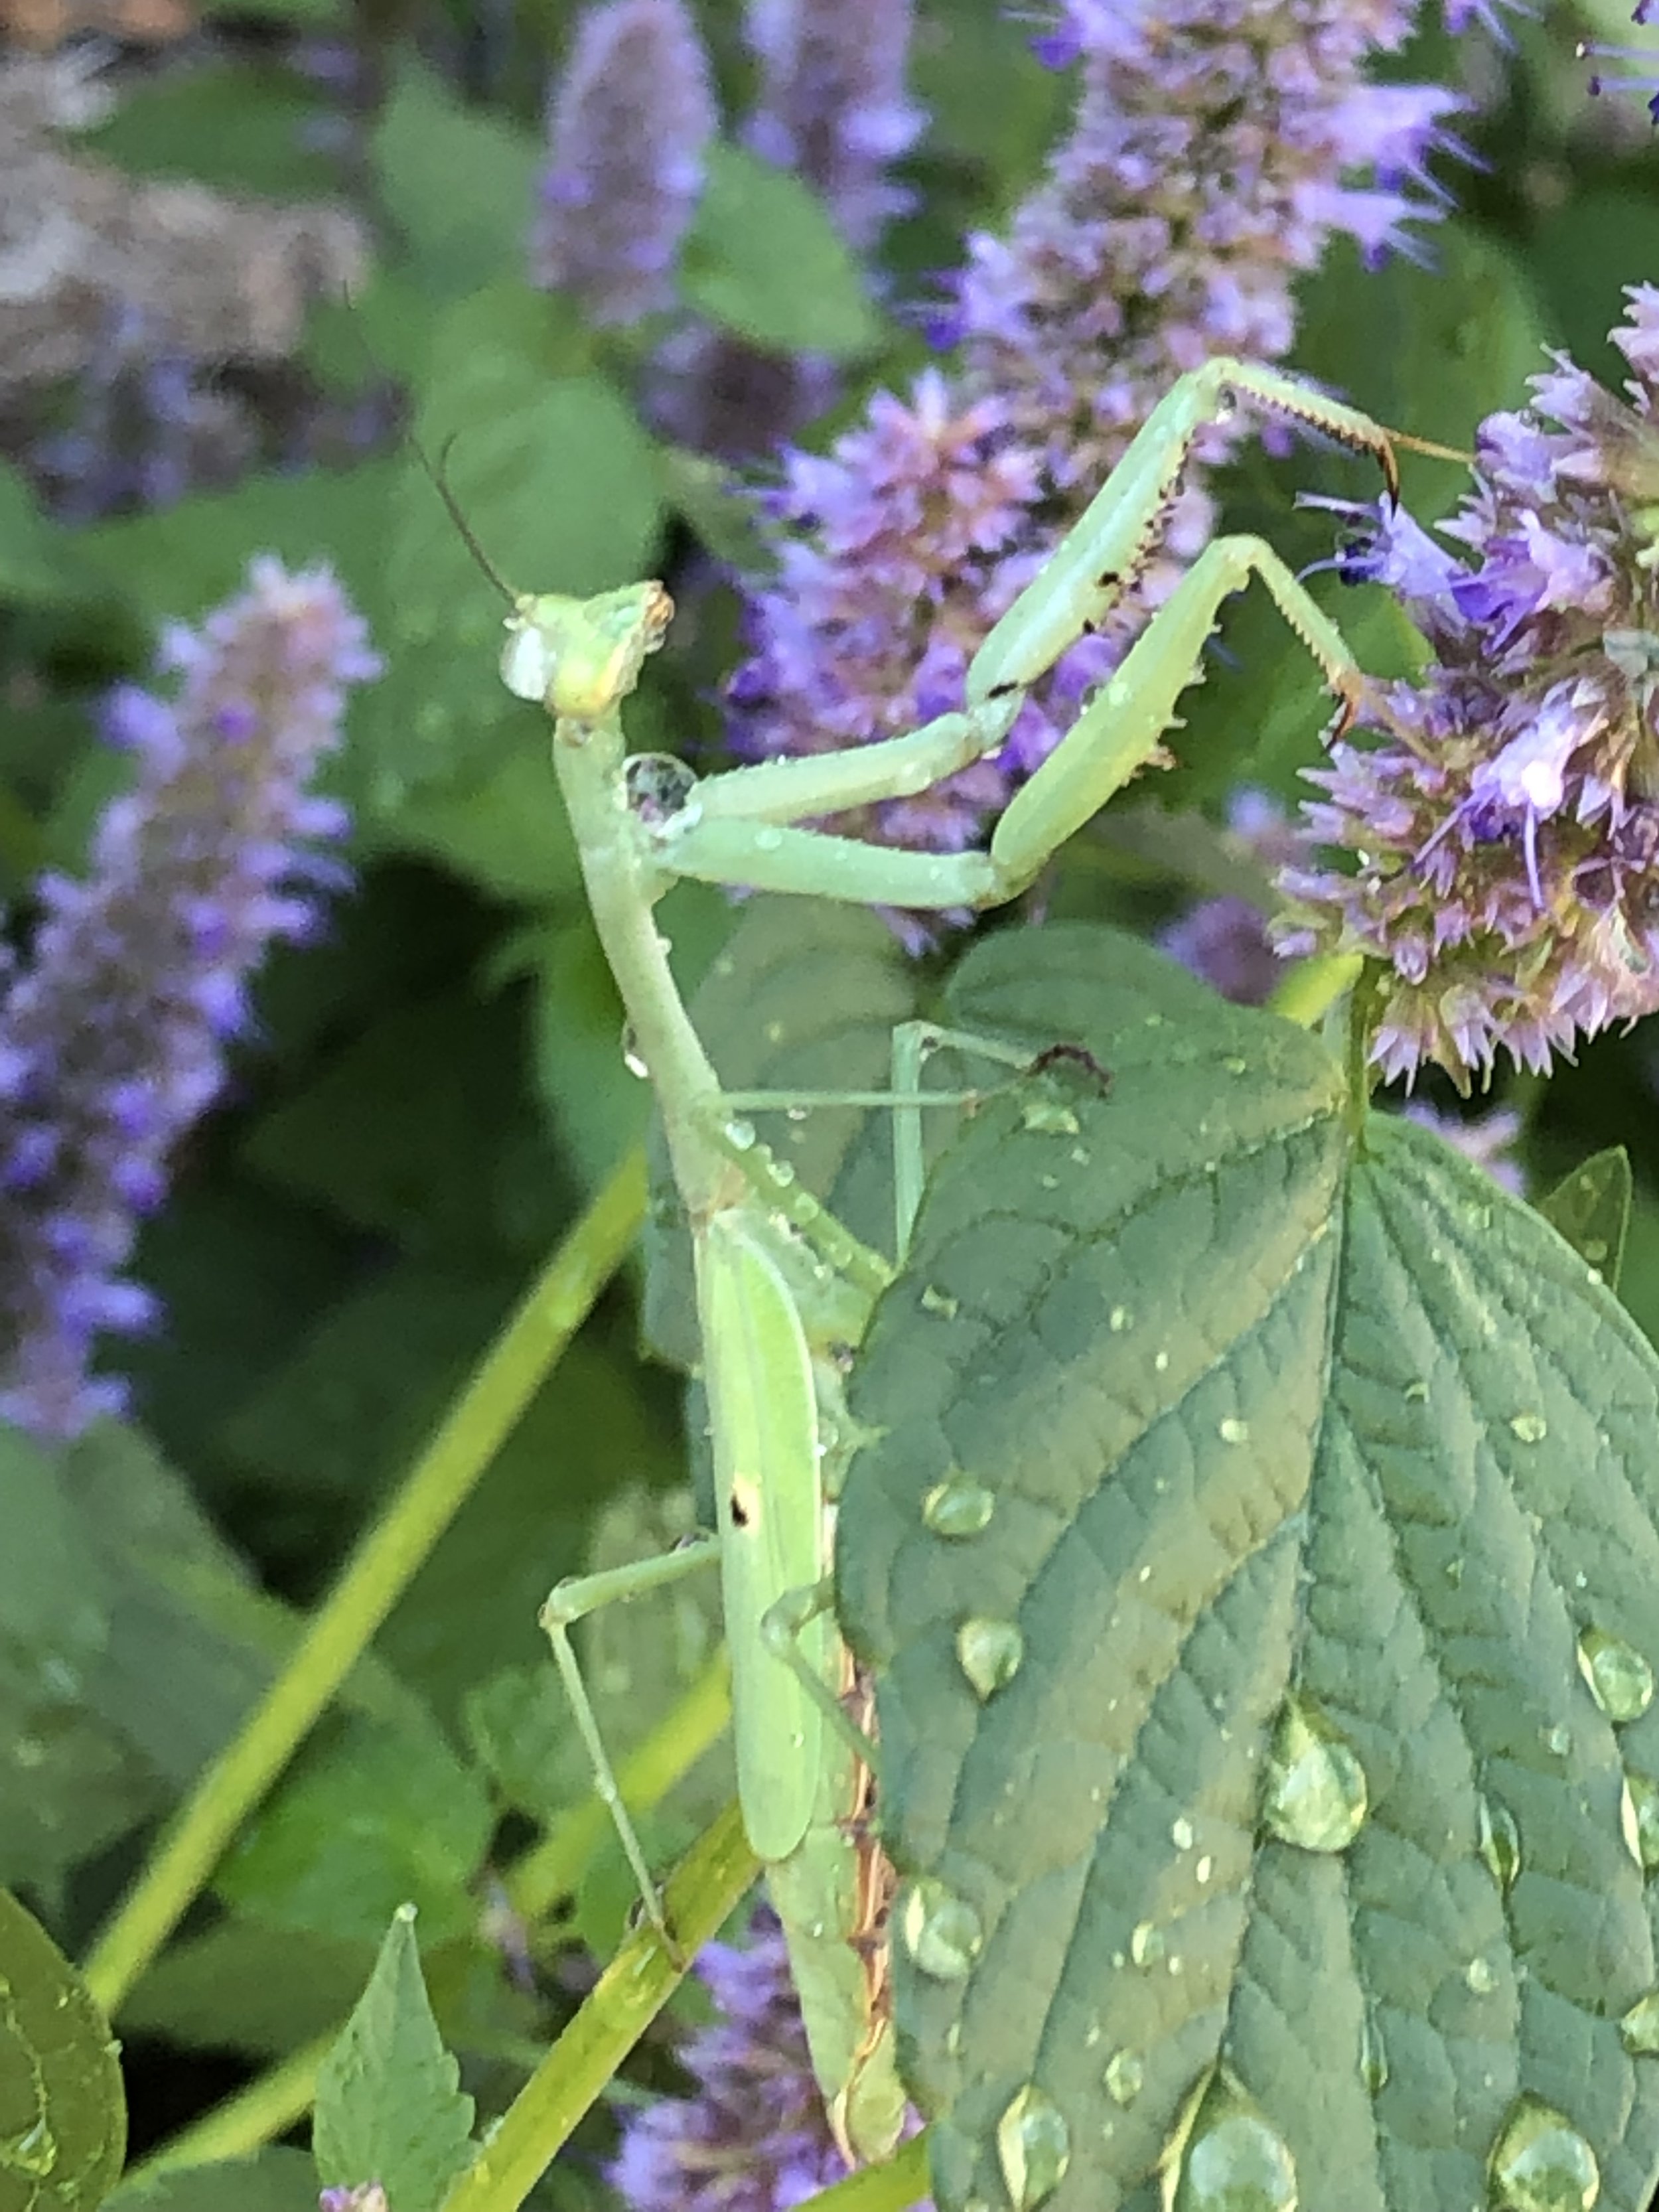  A praying mantis in the garden during the summer of 2020. Photo courtesy of Jessica Brinkworth. 